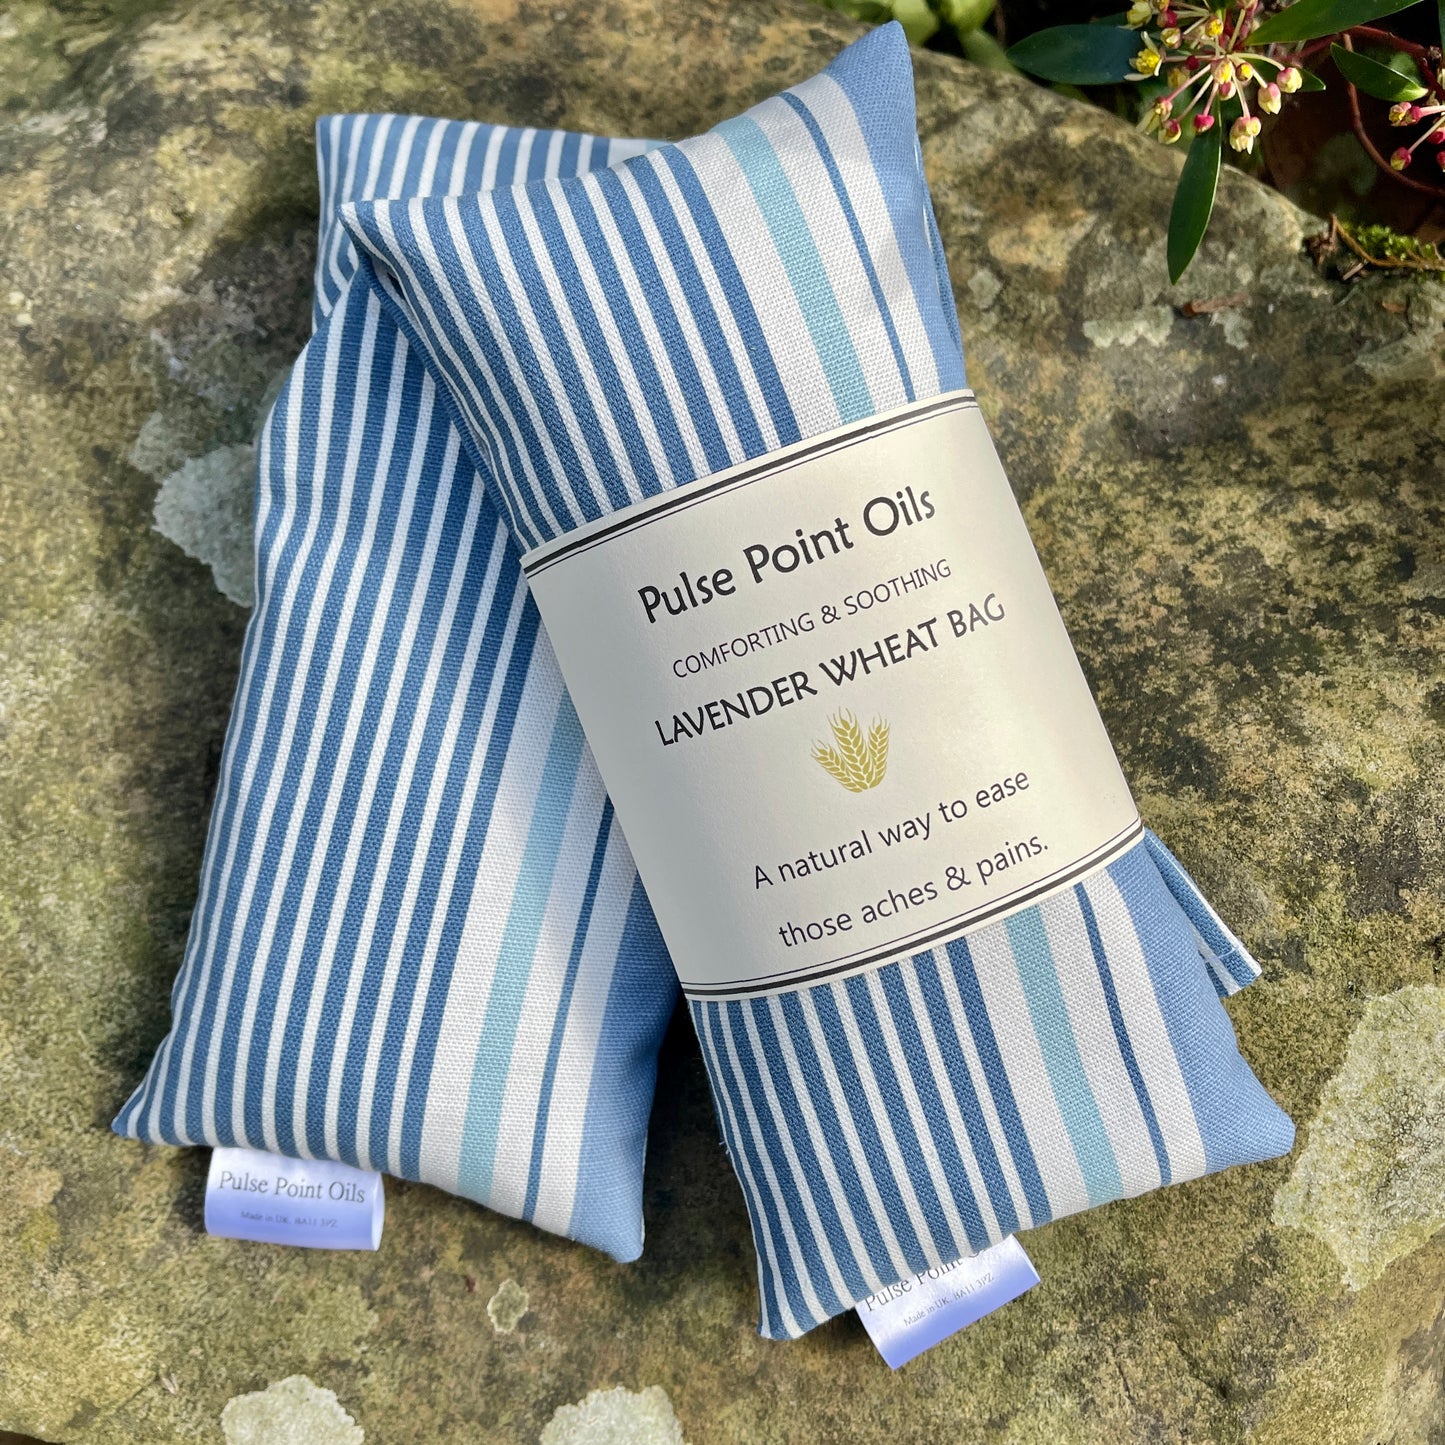 Scented wheat bag, lavender denim blue stripe hottie heating pad, body warmer for wellness and relaxation.